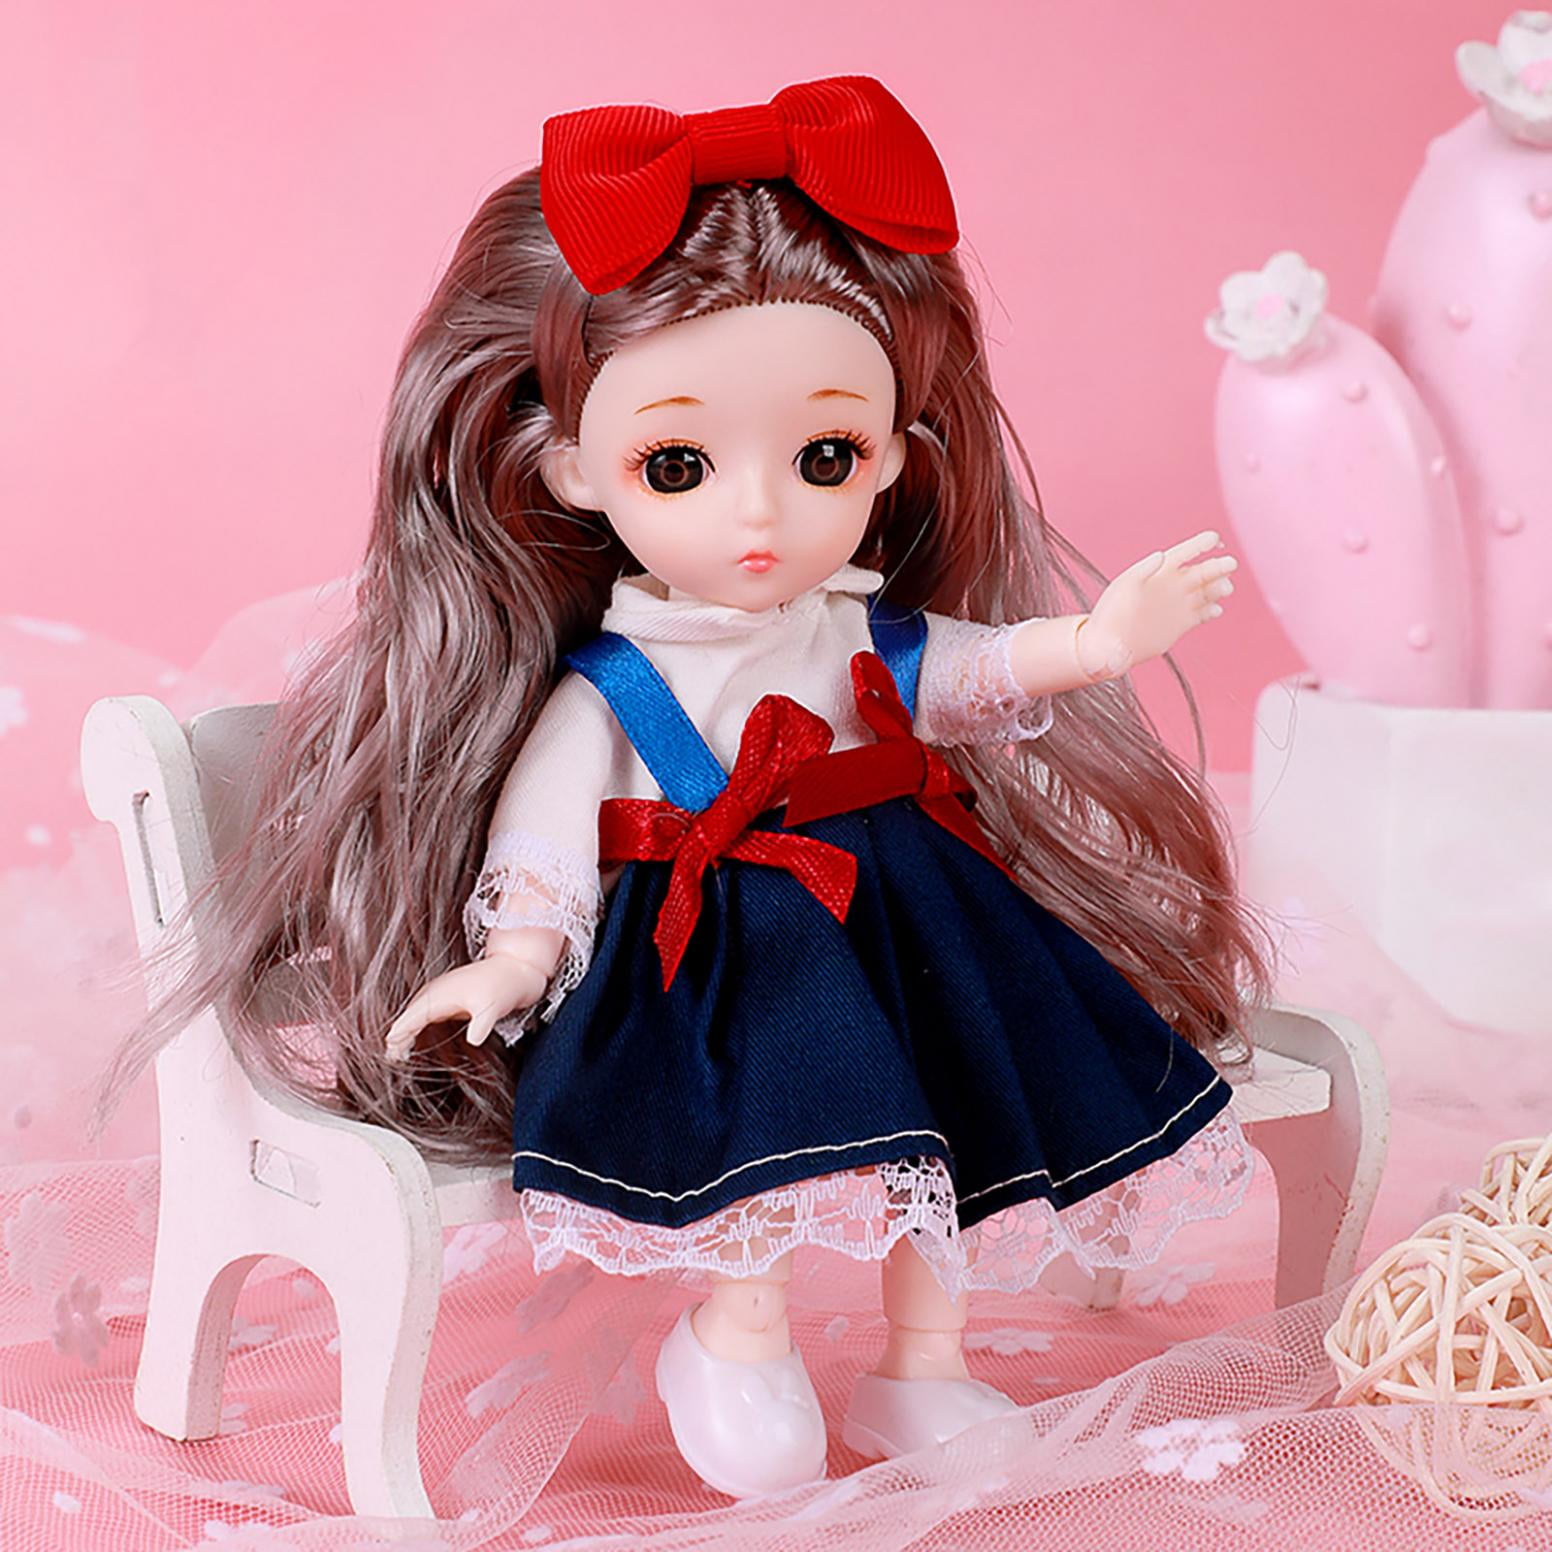 Dress Up Doll Clothes Outfits Set 16cm Mini Doll Action Figures Toy for Kids 